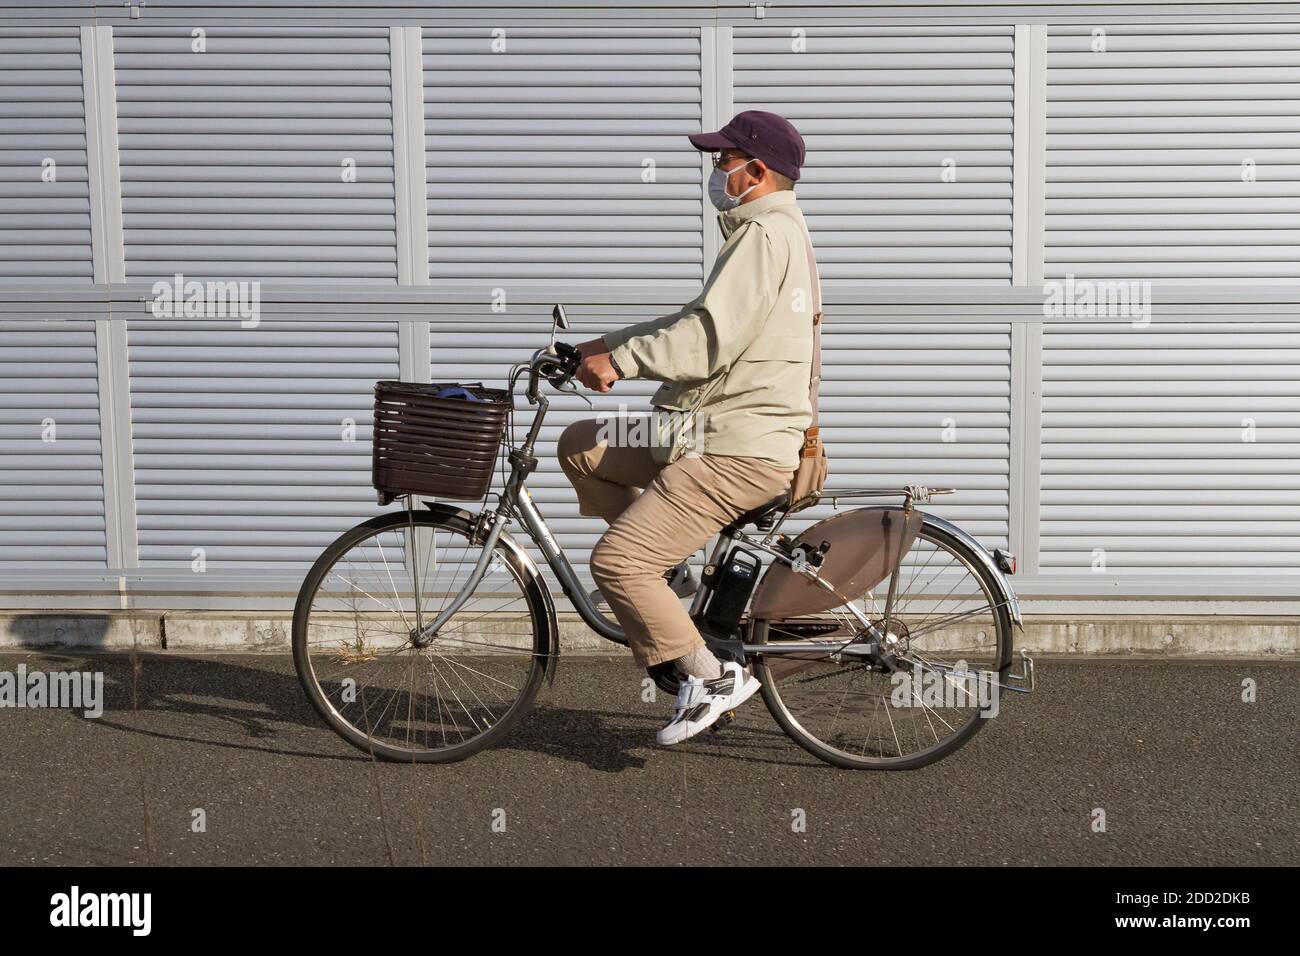 An older Japanese man, wearing a face mask, rides a bicycle in front of a metal wall in rural Kanagawa, Japan Stock Photo